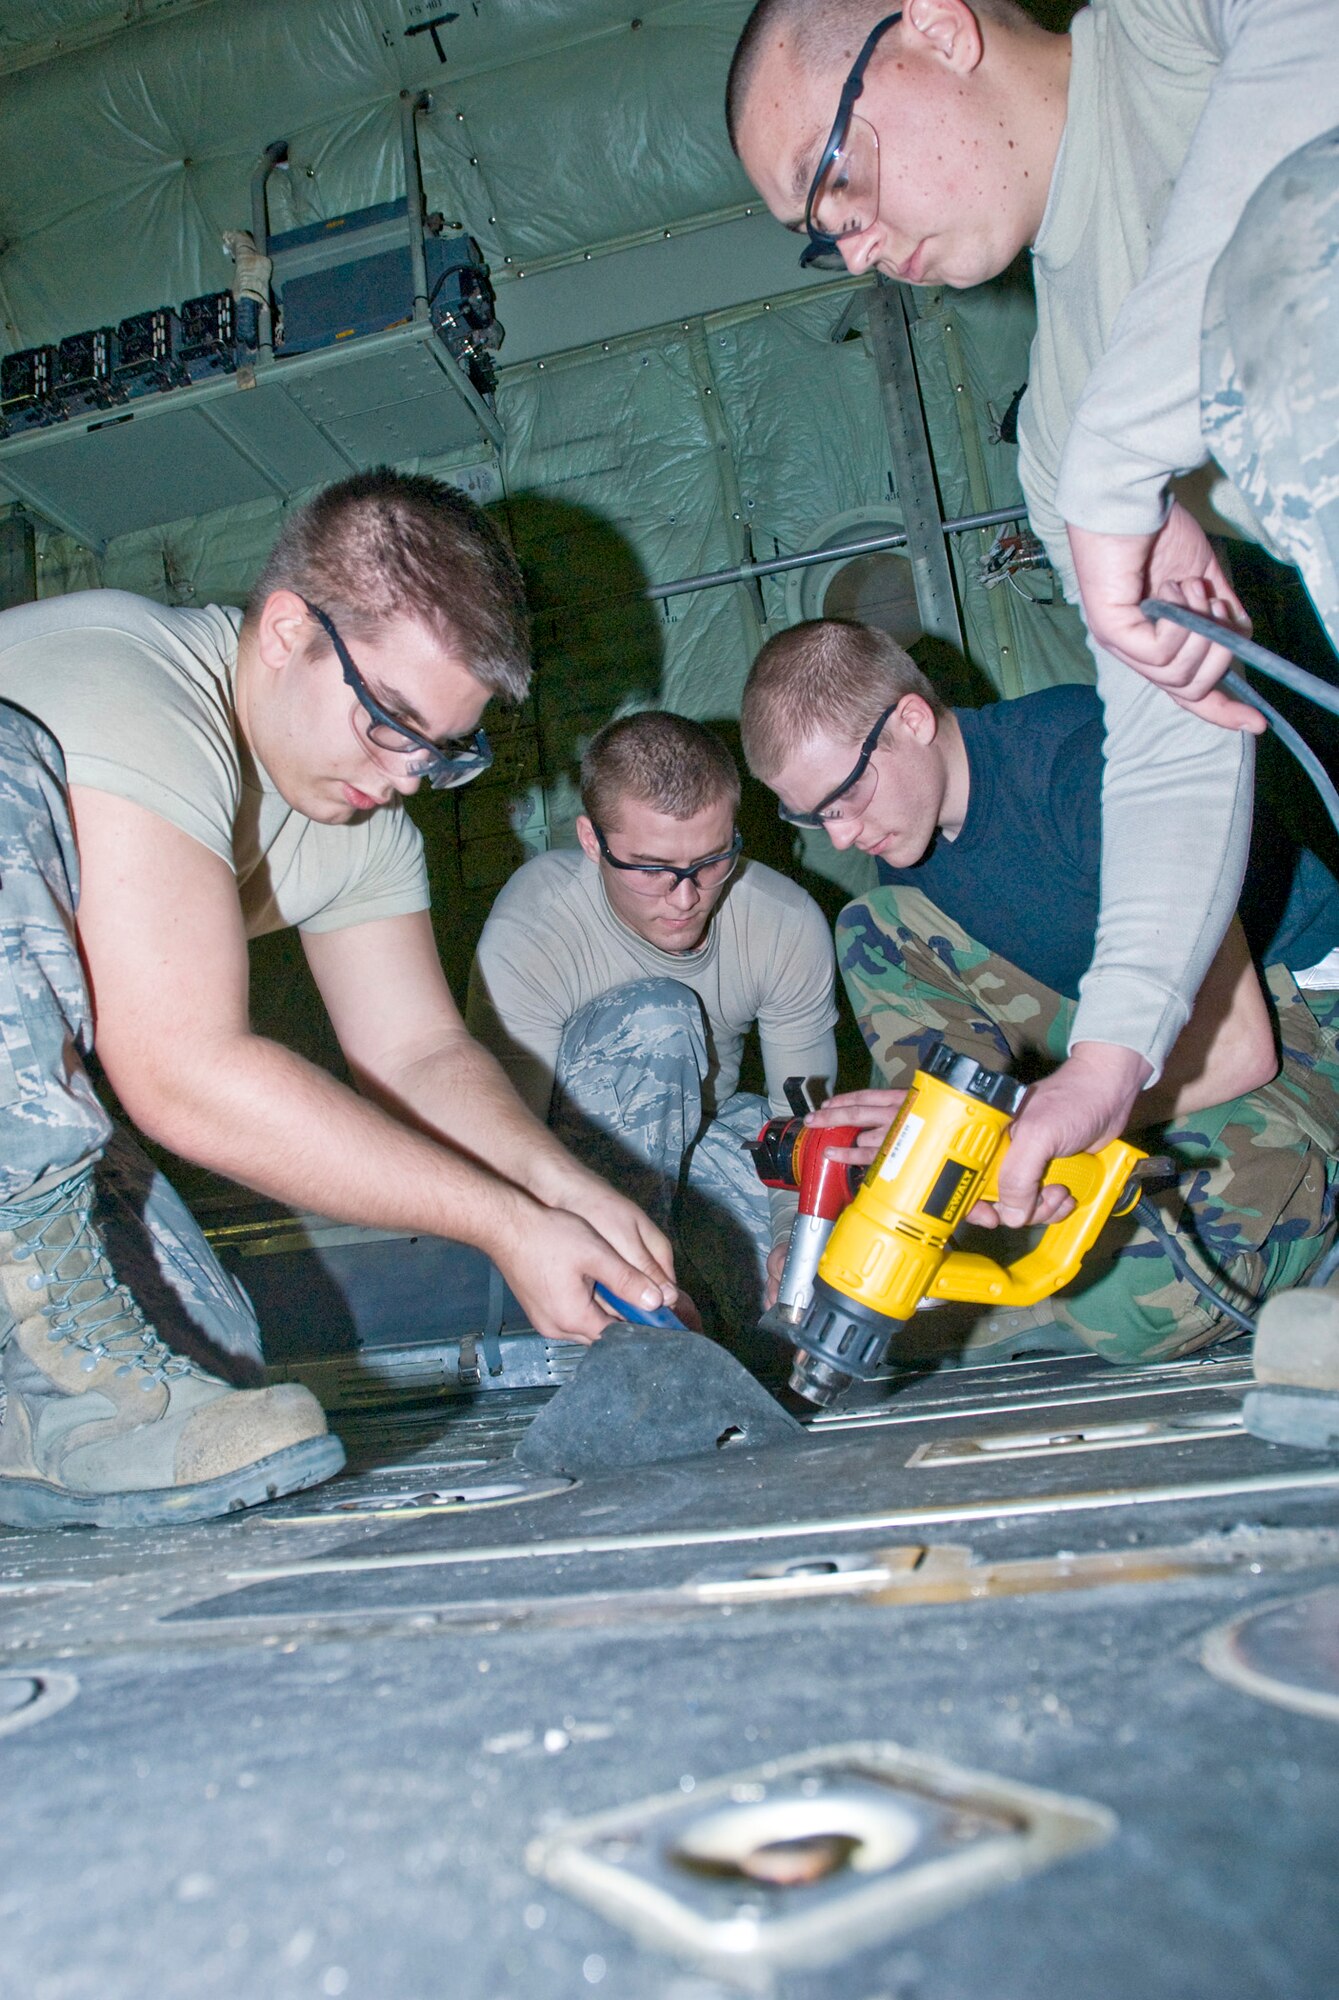 (From left) Airman 1st Class David Lee, Senior Airmen Eric McGarrh and Jason Heathington and Airman 1st Class Evan Owens work together to remove anti-skid tape from a C-130 Hercules? cargo floors Jan. 4, 2011, at Little Rock Air Force Base, Ark. The Air Force saves thousands of dollars by sending aircraft to be refurbished rather than sending them to depot. The Airmen are all 19th Equipment Maintenance Squadron members. (U.S. Air Force Photo/Staff Sgt. Nestor Cruz)